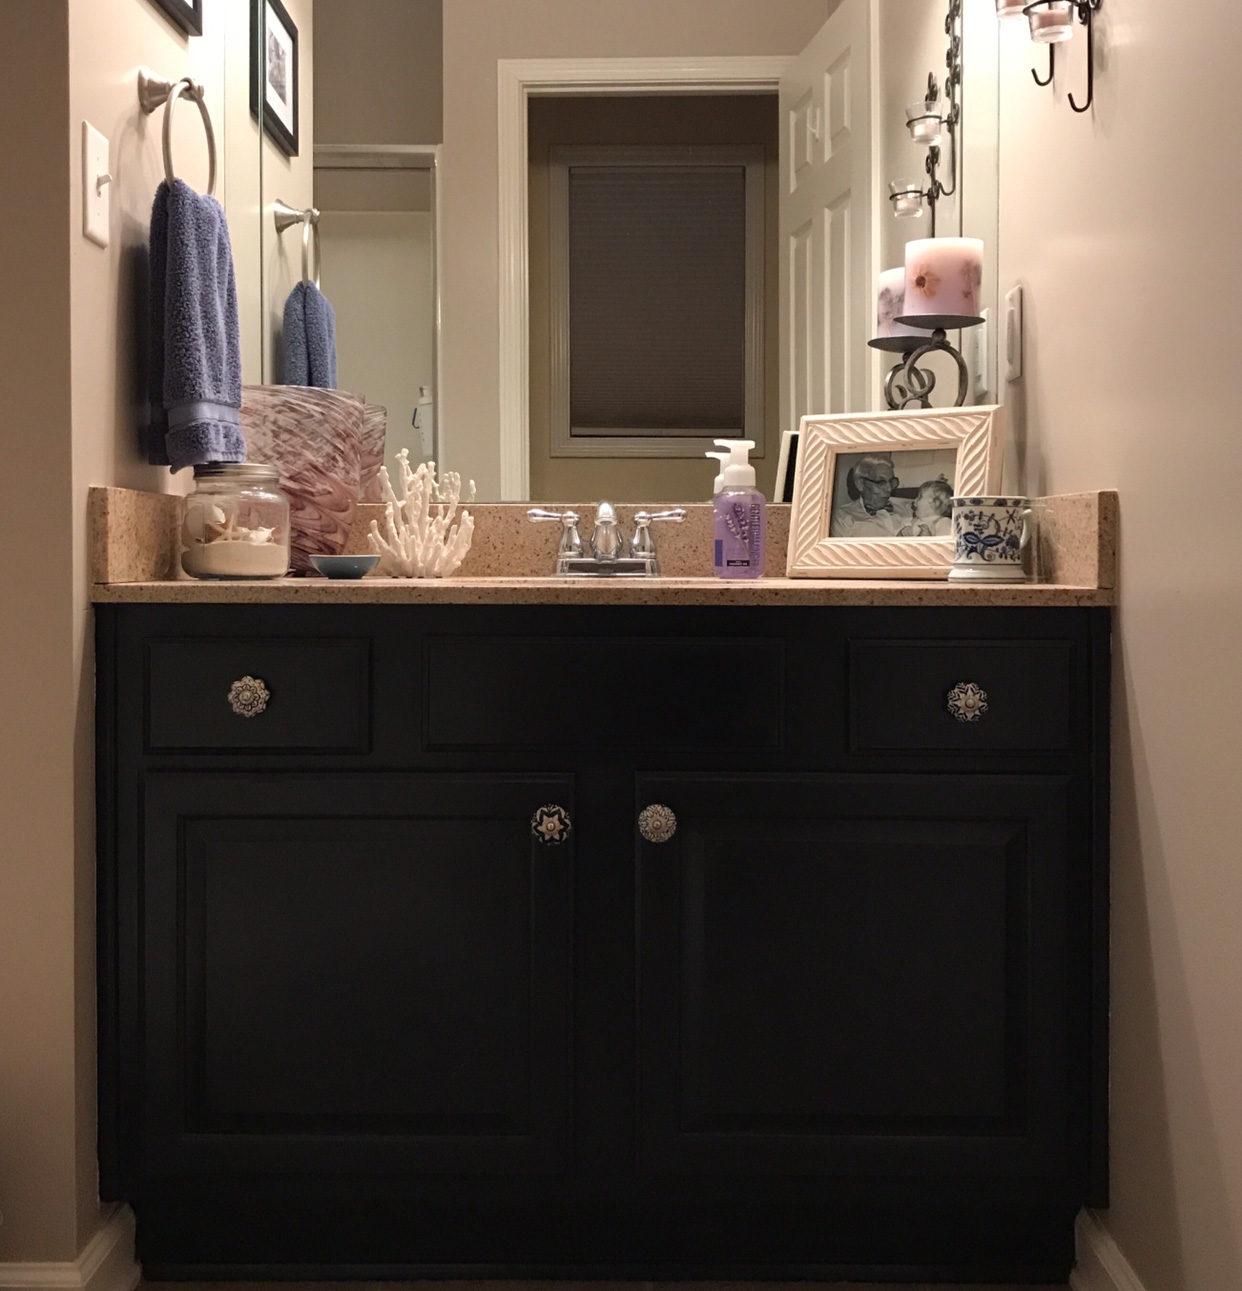 Chalk Painted Bathroom Vanity Makeover Our Storied Home,Modern Brown And Gray Bedroom